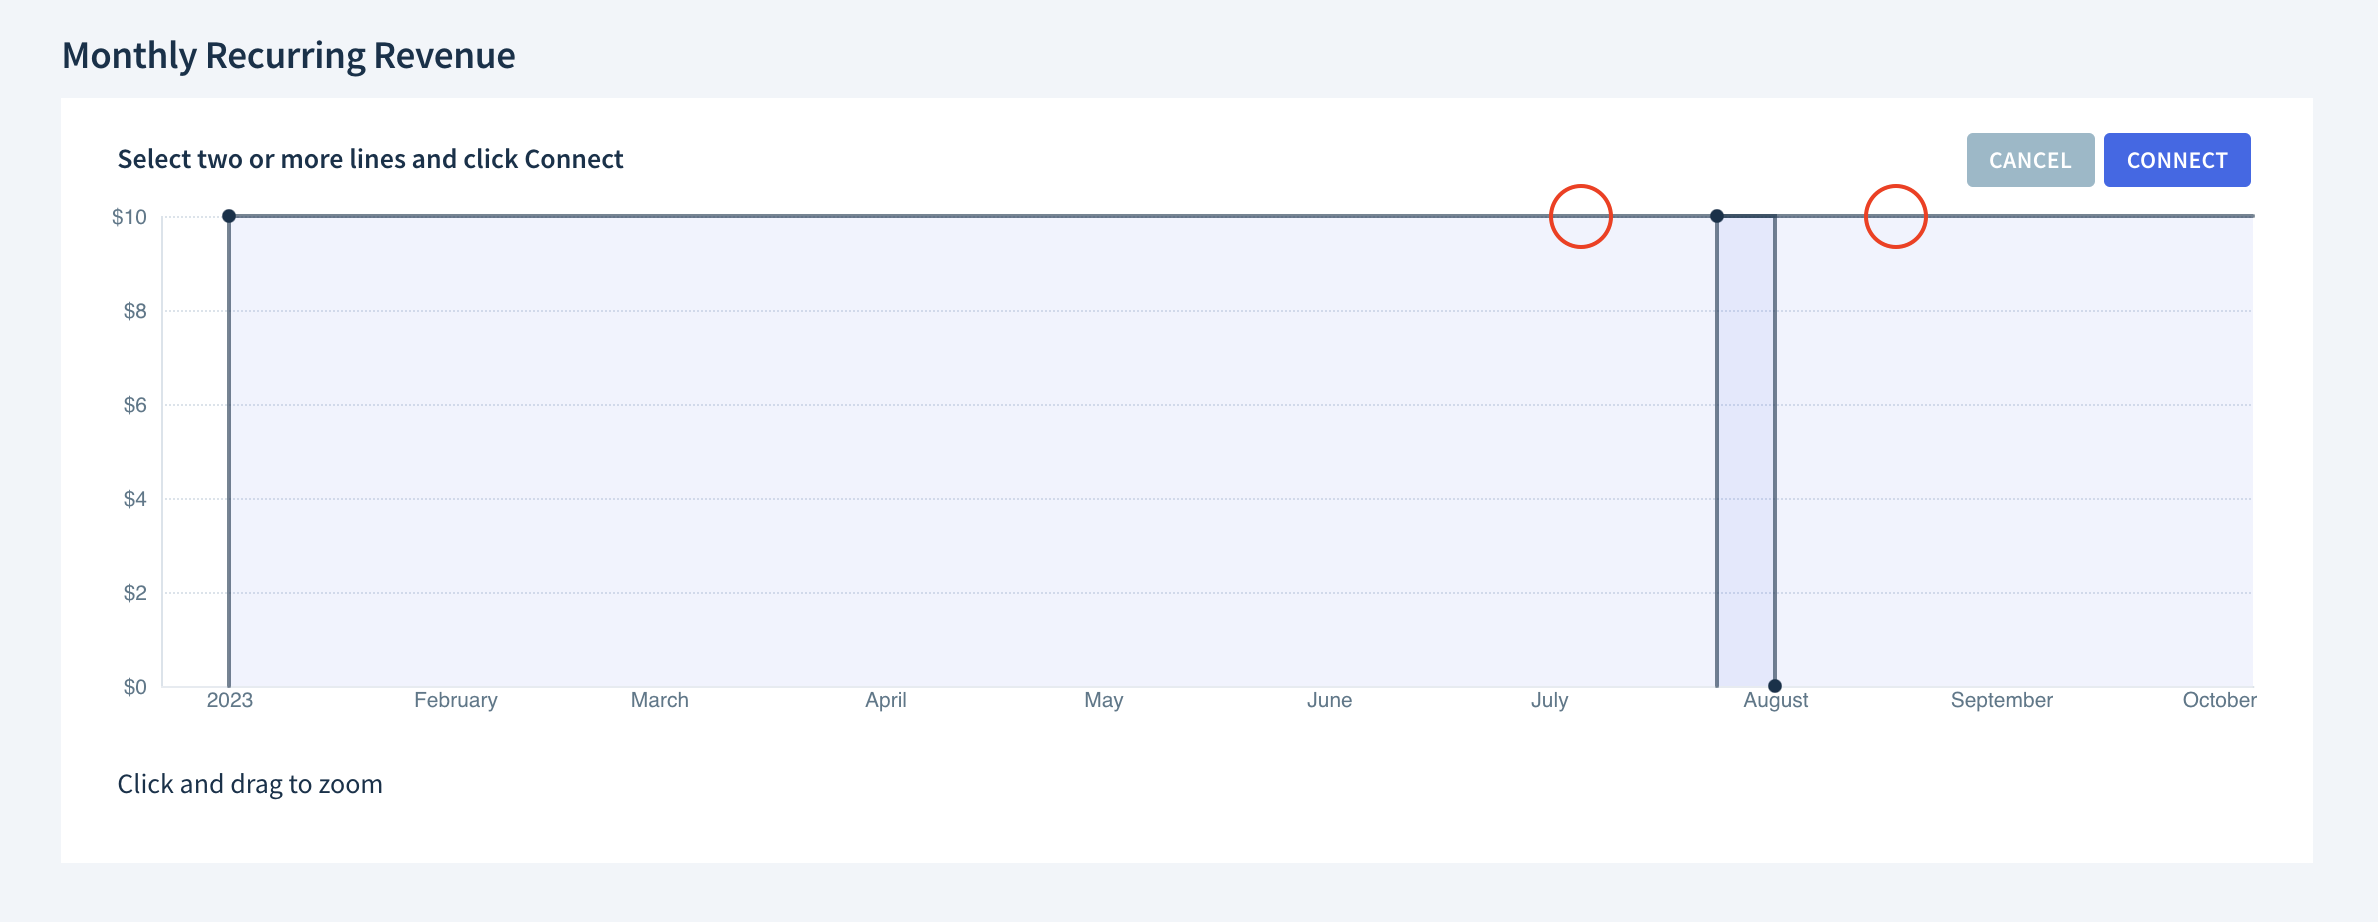 Screenshot of the Monthly Recurring Revenue chart with both subscription lines selected.